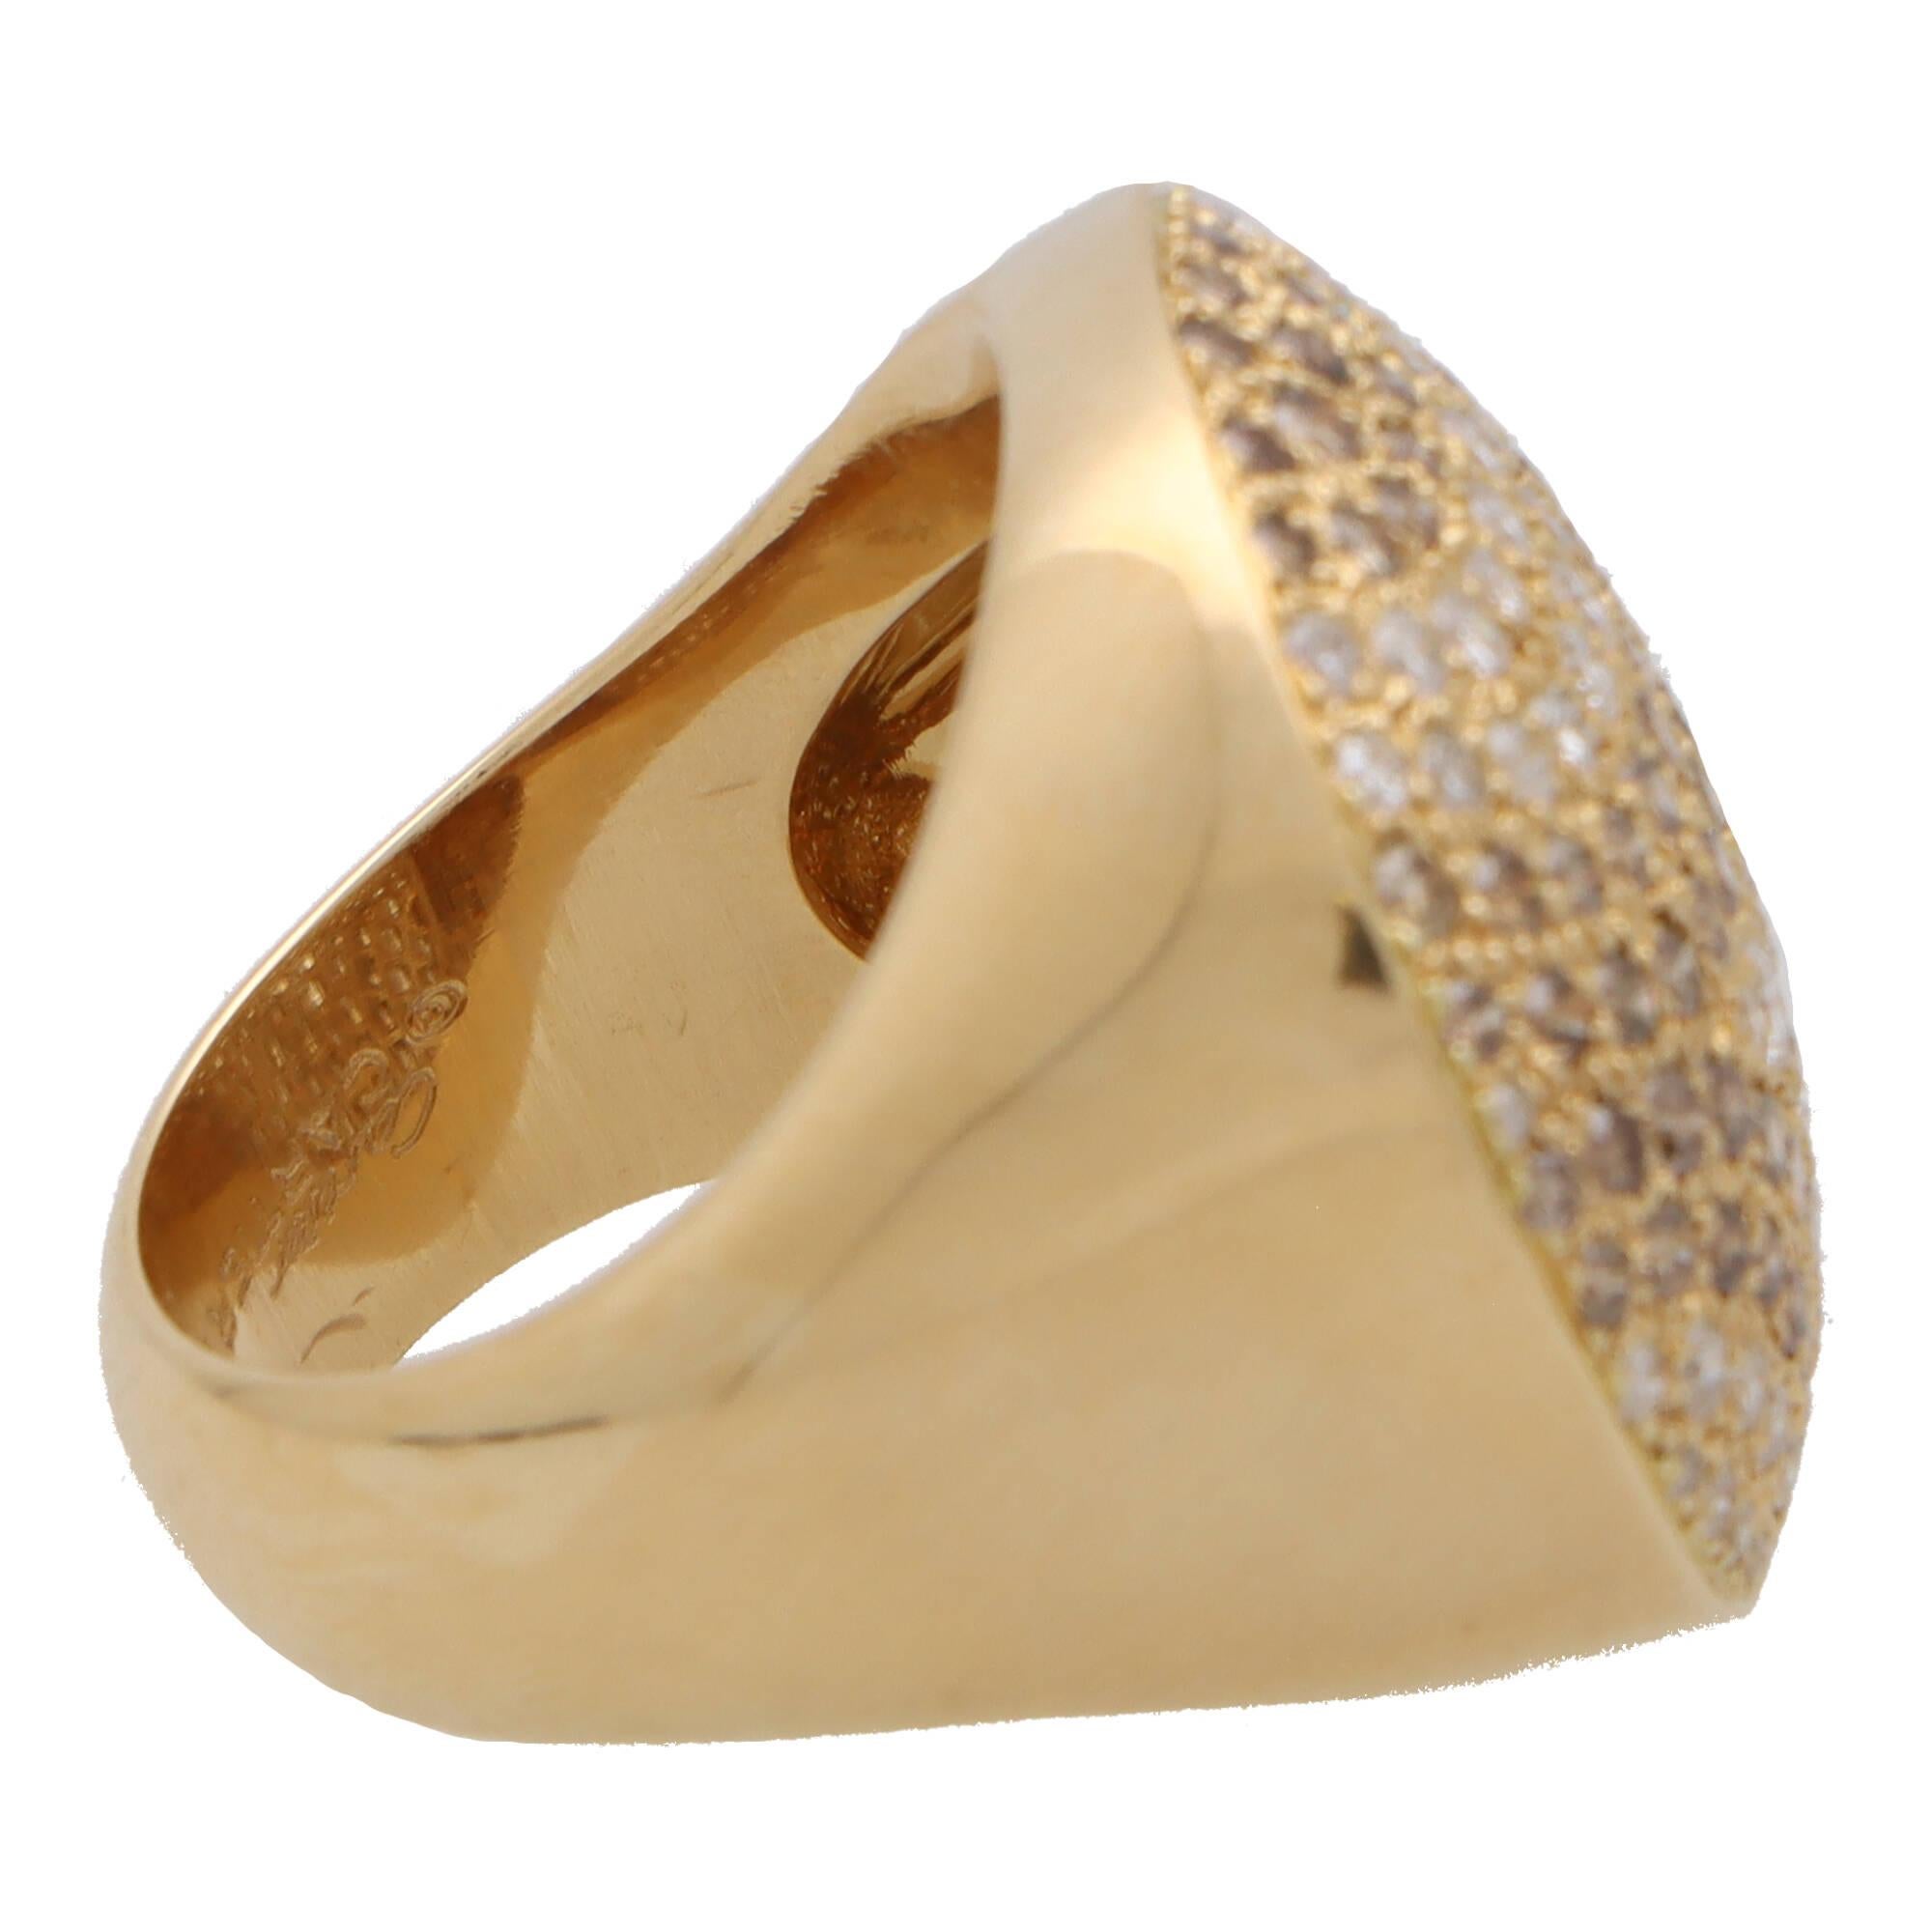 Vintage Cartier Jeton Sauvage White and Cognac Diamond Cocktail Ring in 18k Gold 1